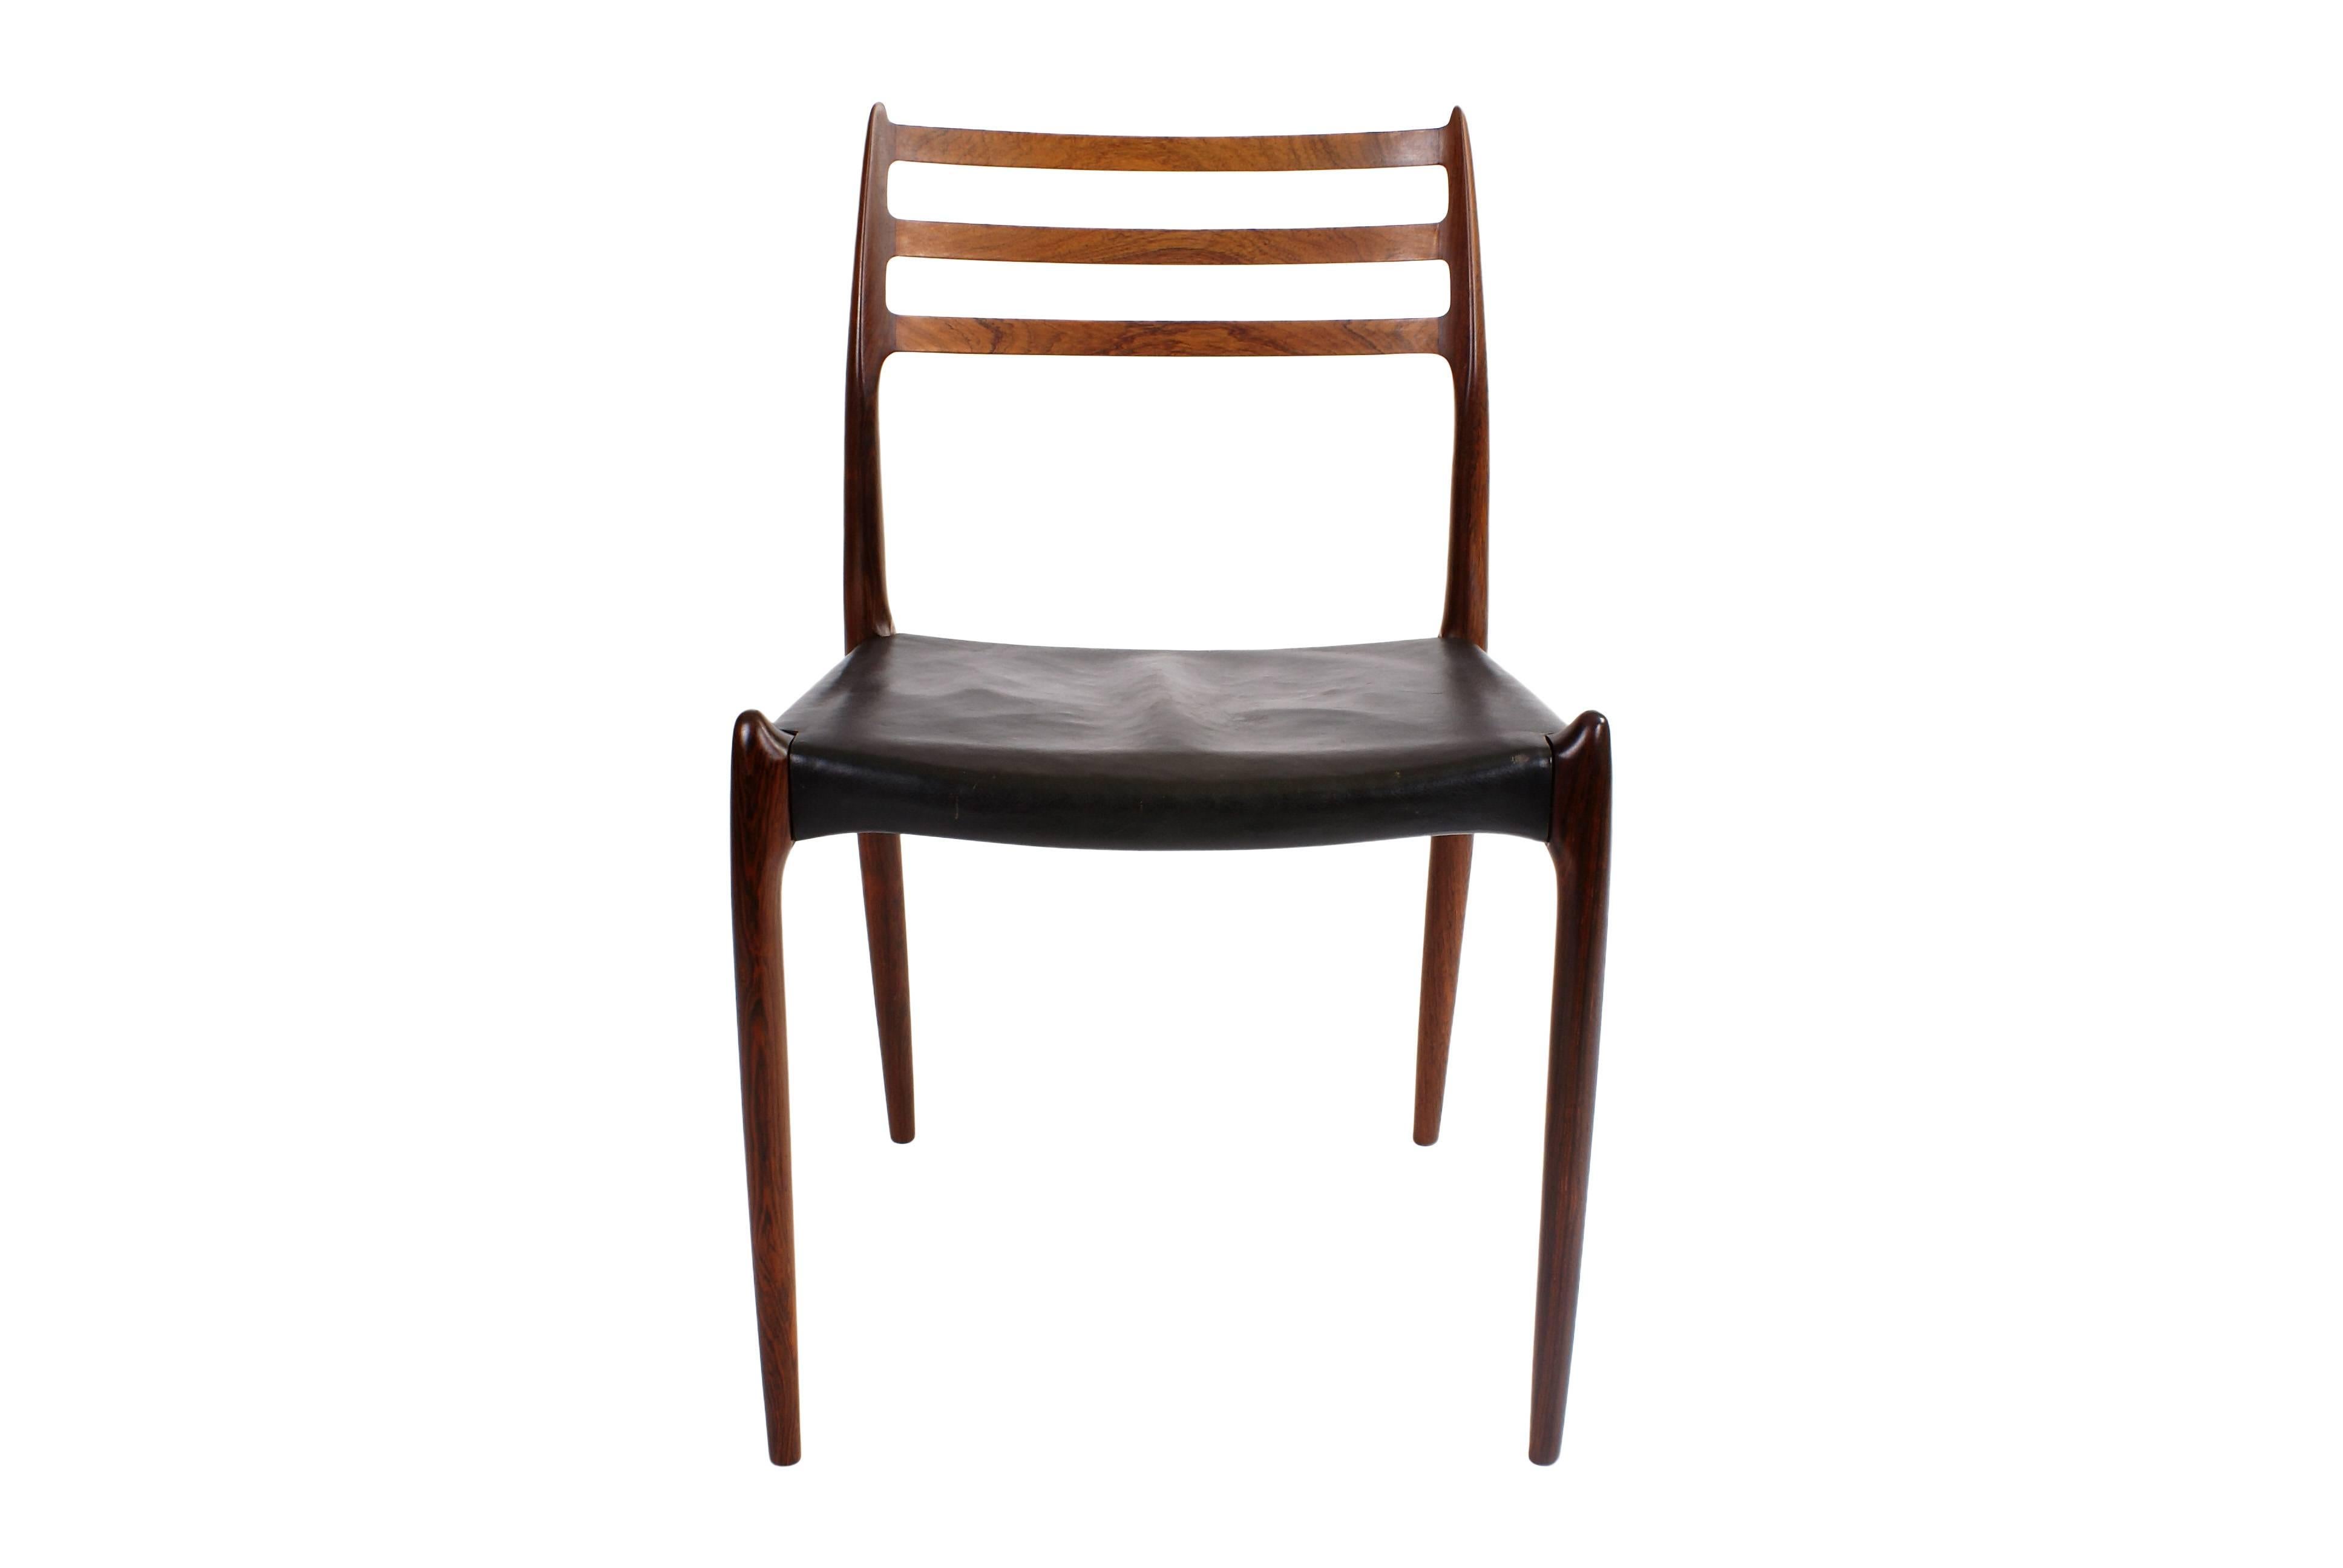 Niels O. Møller set of ten Brazilian rosewood dining chairs, horizontal bars in back. Seats with original black leather. Model 78. Designed 1962. Made by J. L. Møller.

The set is in excellent condition.

Price is for the set of ten chairs.